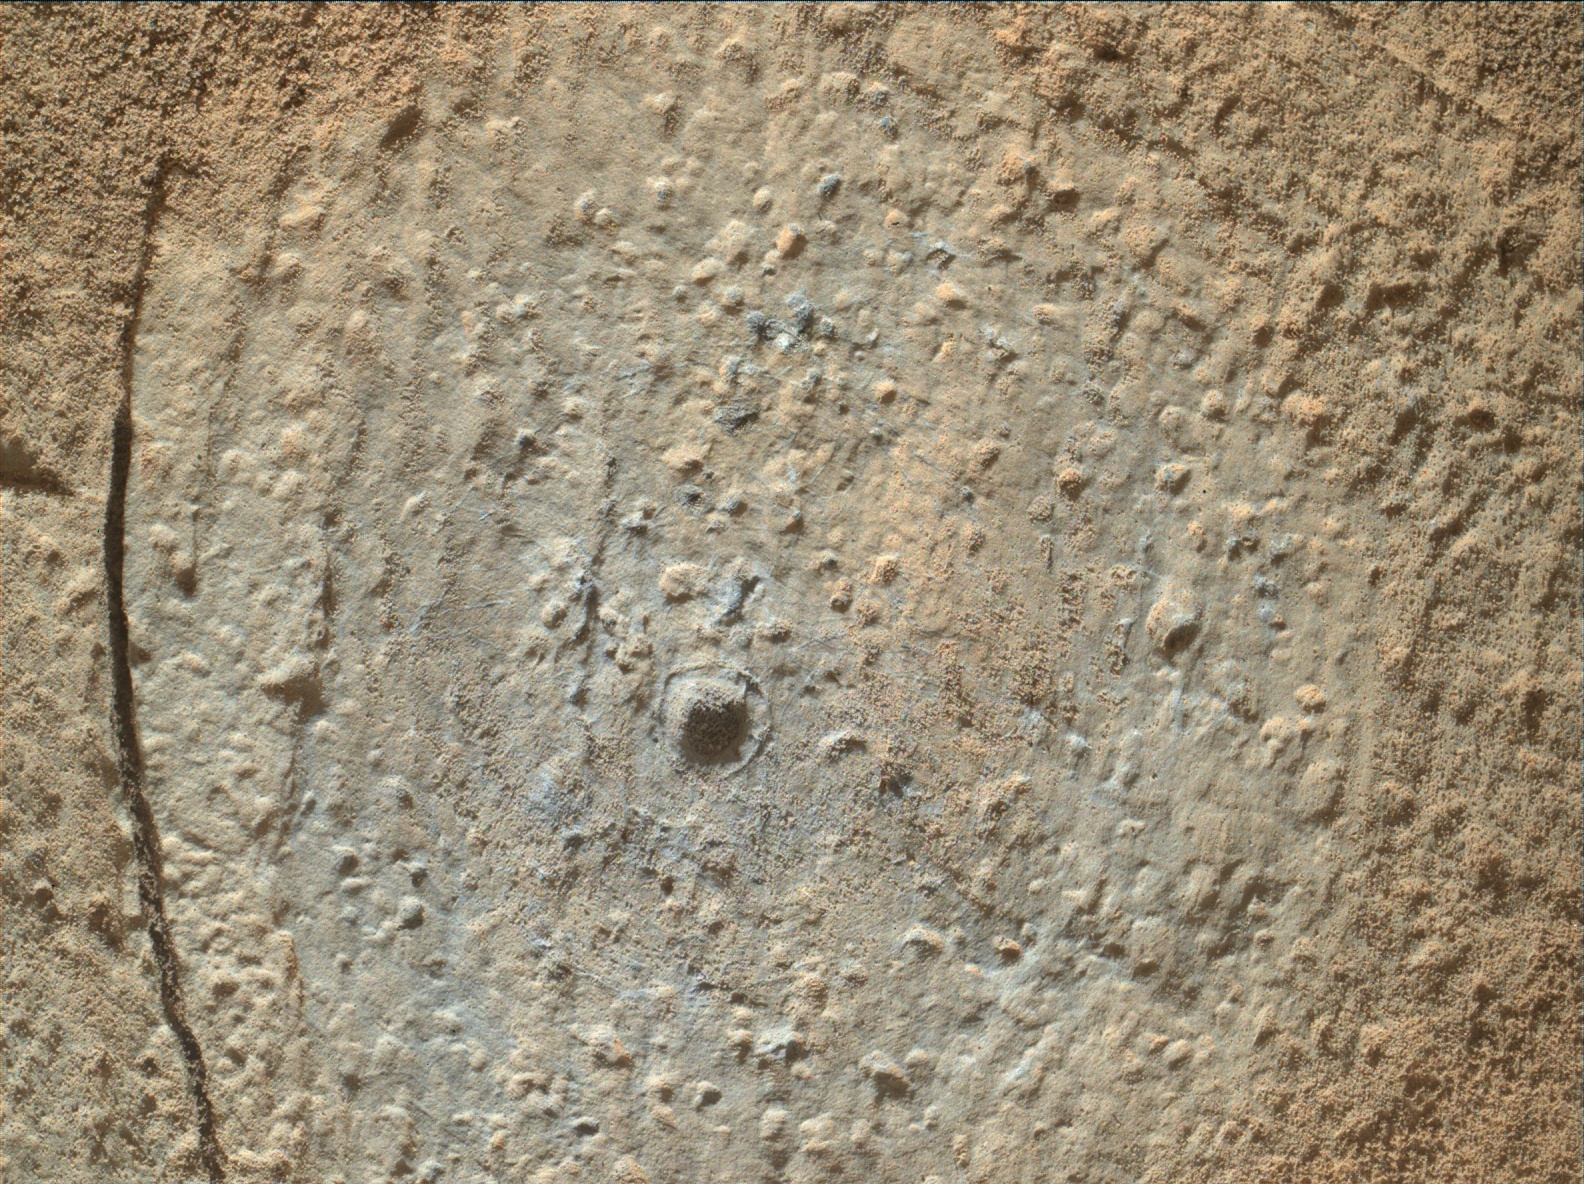 Nasa's Mars rover Curiosity acquired this image using its Mars Hand Lens Imager (MAHLI) on Sol 905